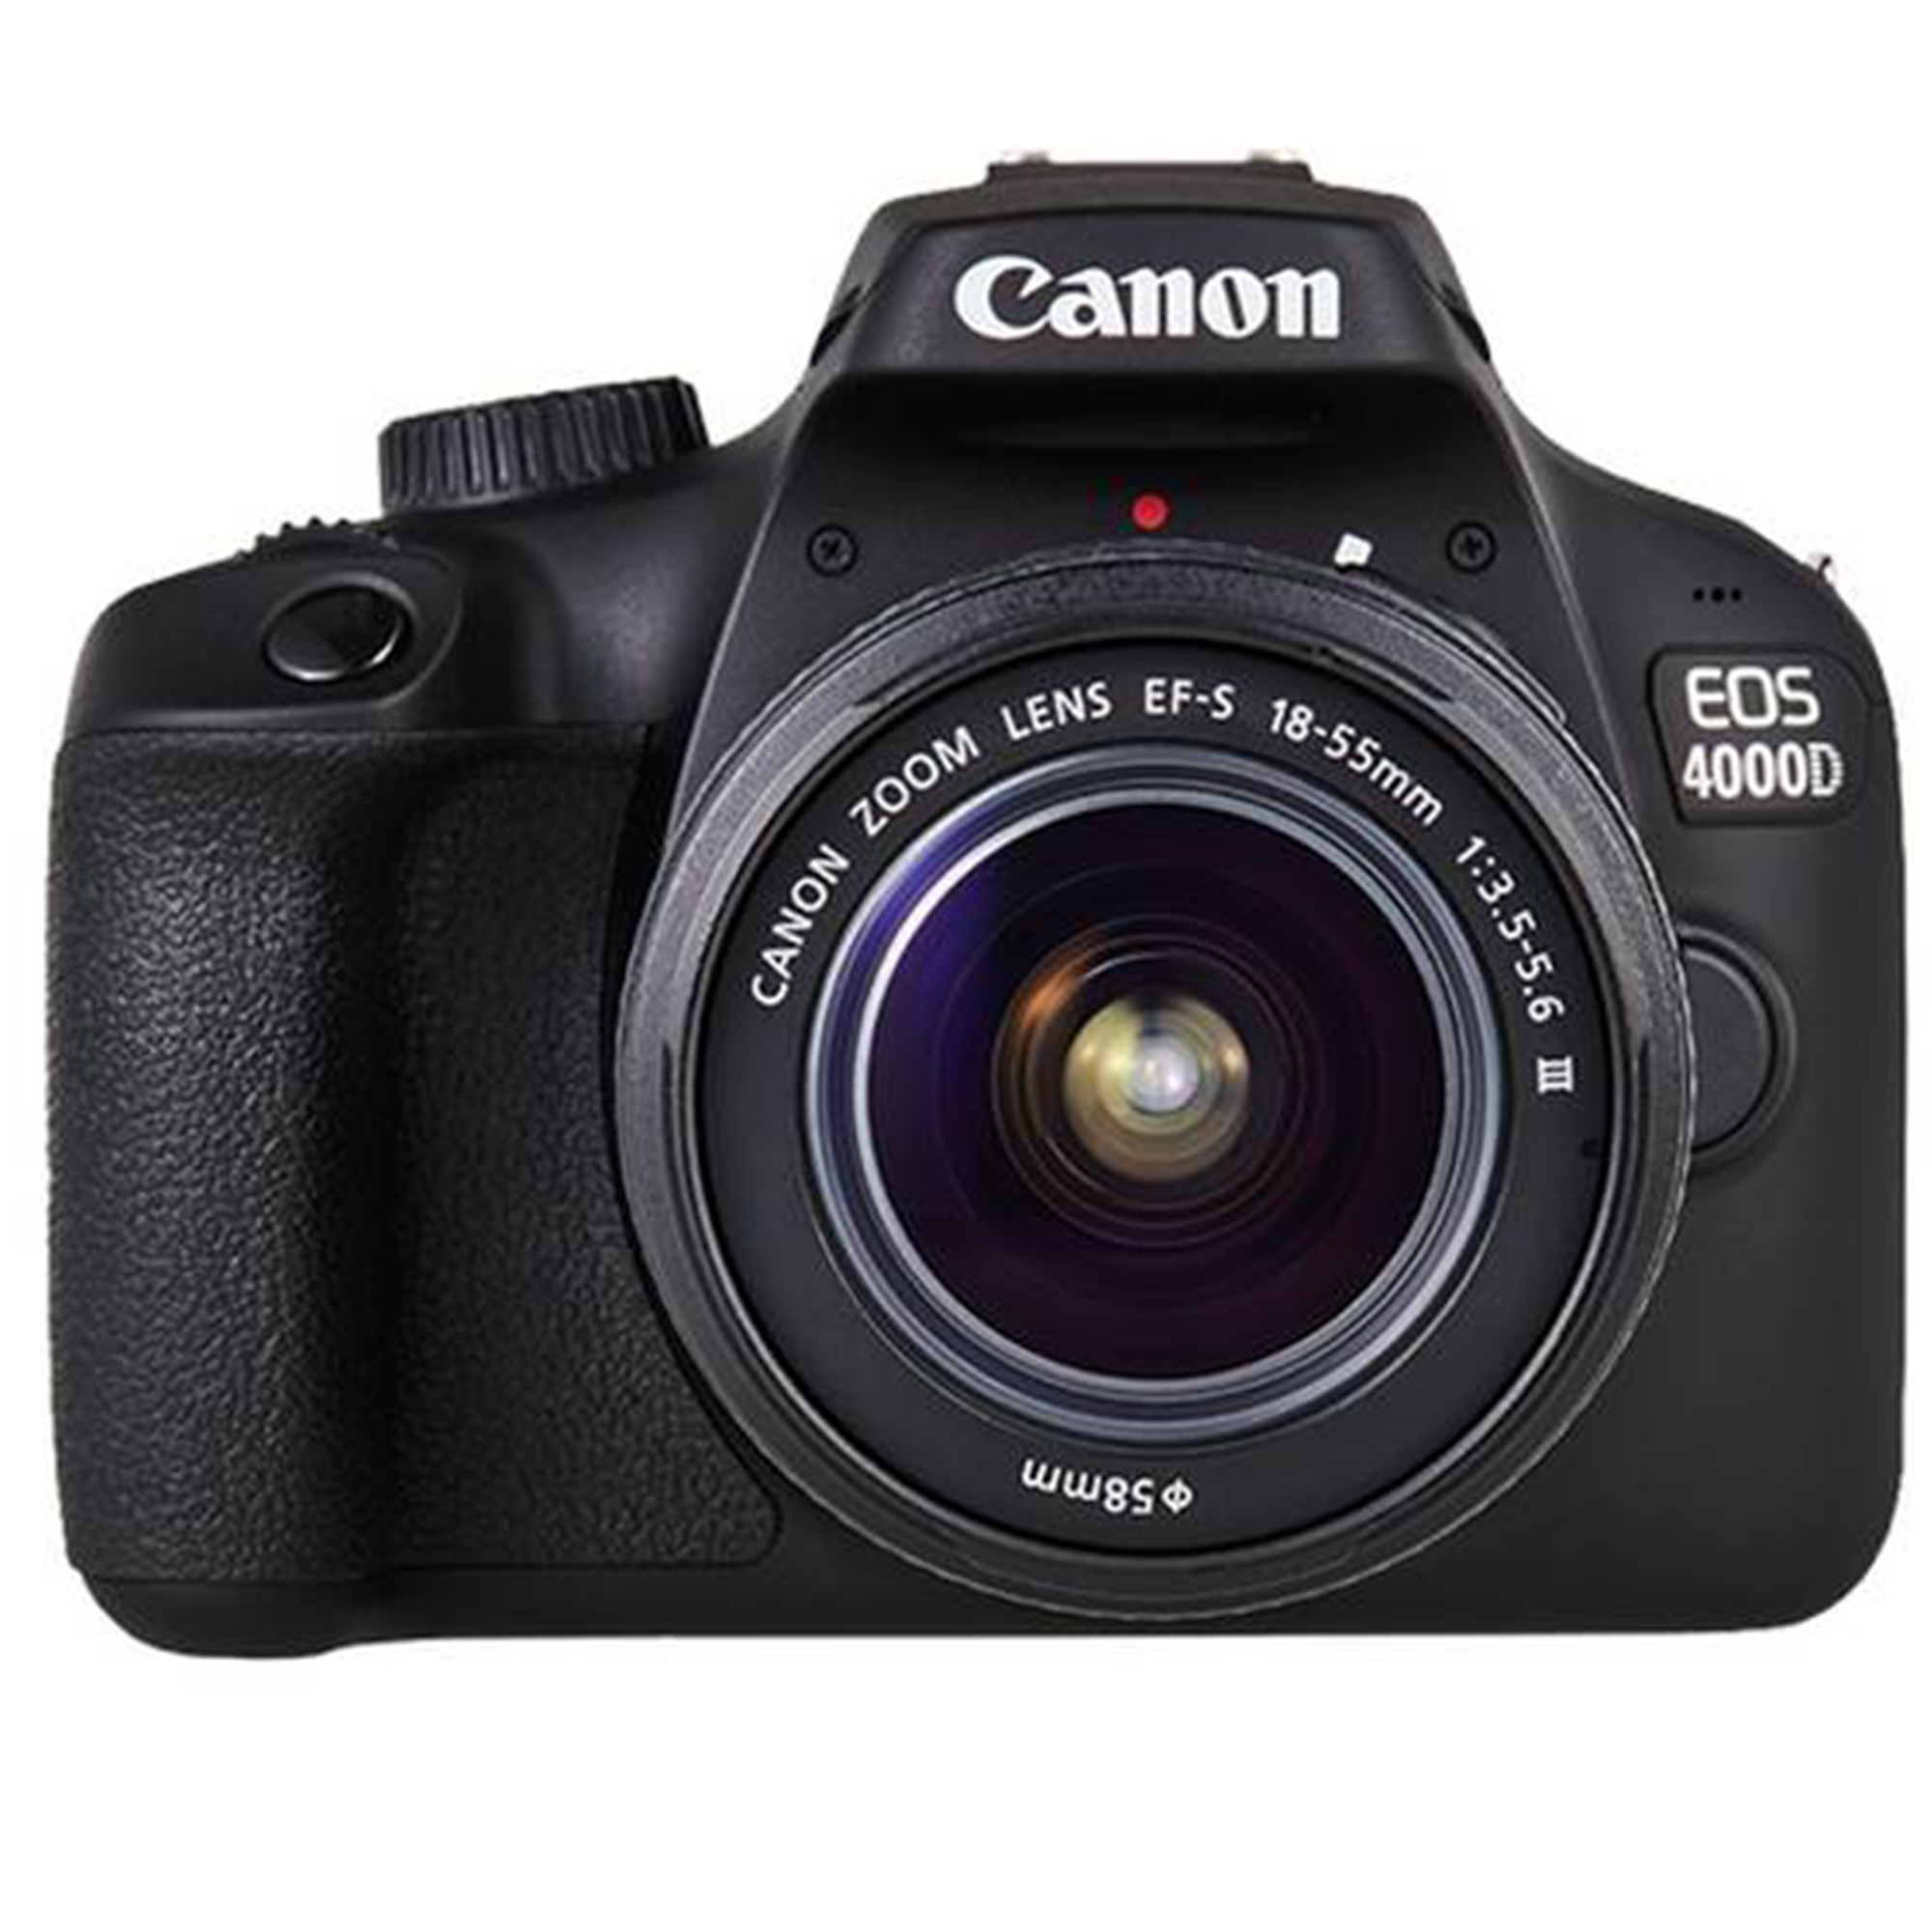 Canon EOS 4000D With 18-55mm Lens IS Kit